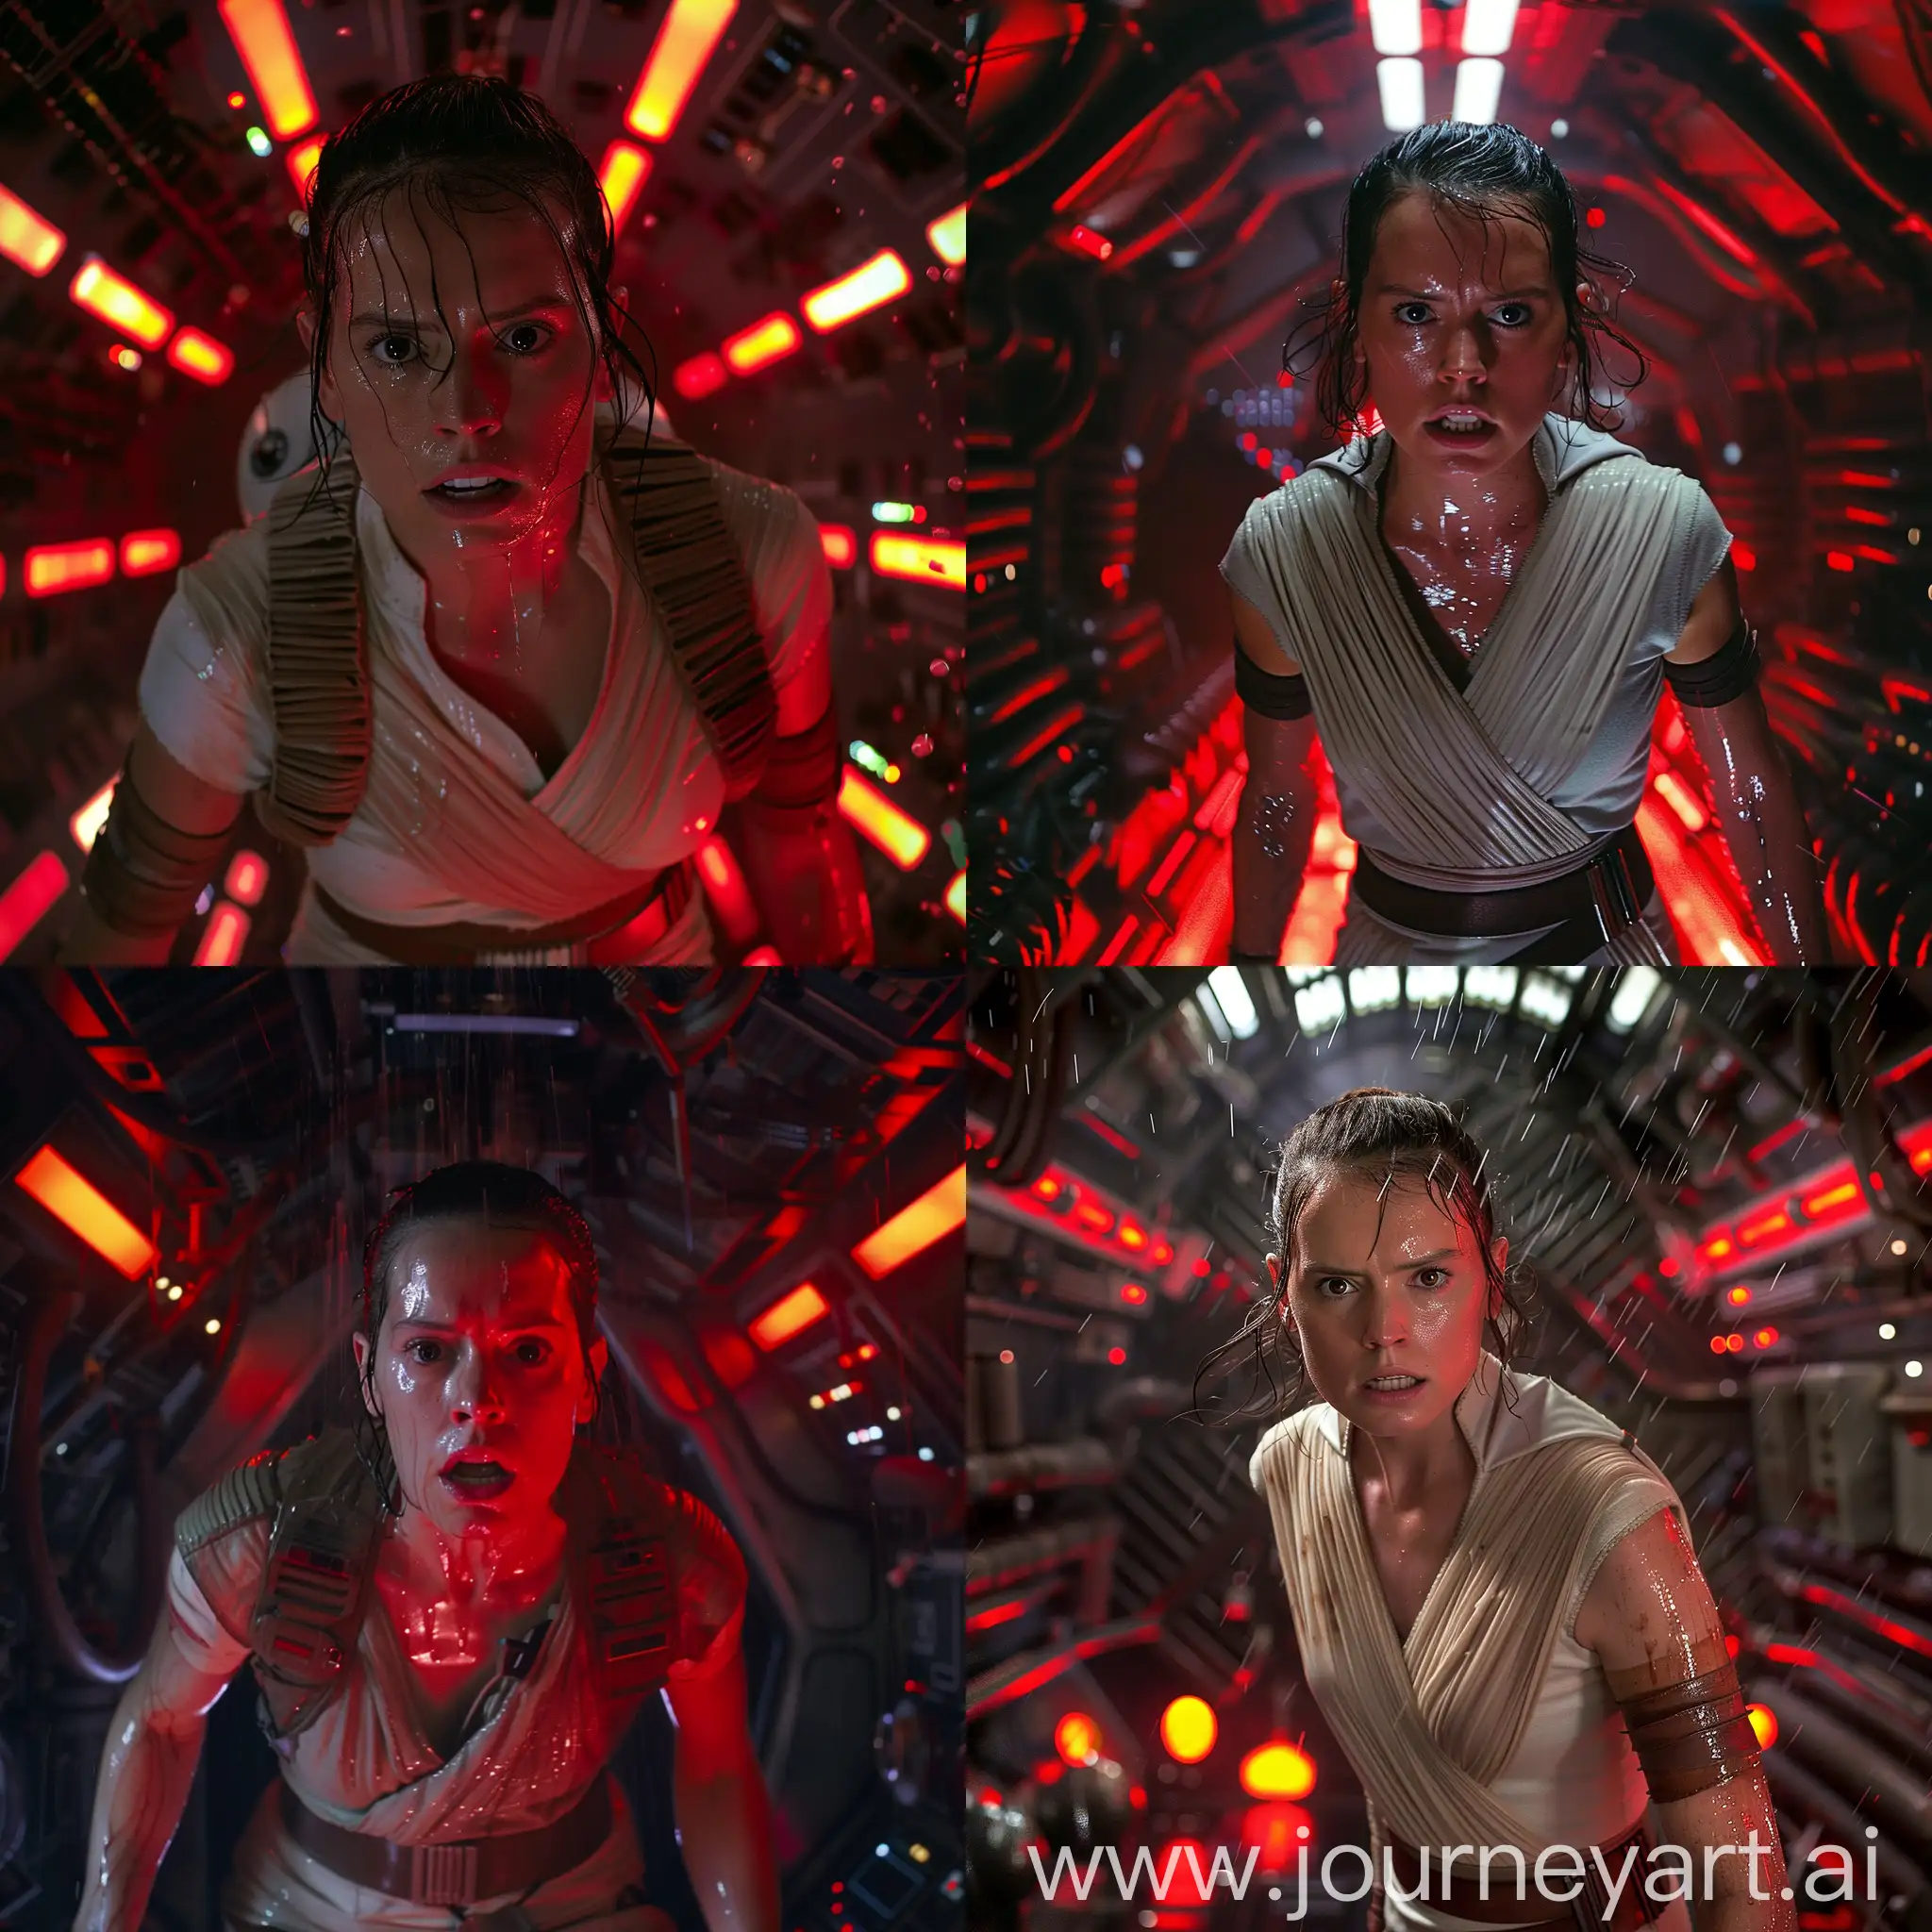 Rey Skywalker Cinematic scenes from the New Alien Film, Rey Skywalker as the main character of the film, wearing the astronaut uniform from the film Alien, in the claustrophobic, dense and dark interior of the Nostromo spaceship with red lights, with Rey Skywalker's, with wet hair and very sweaty